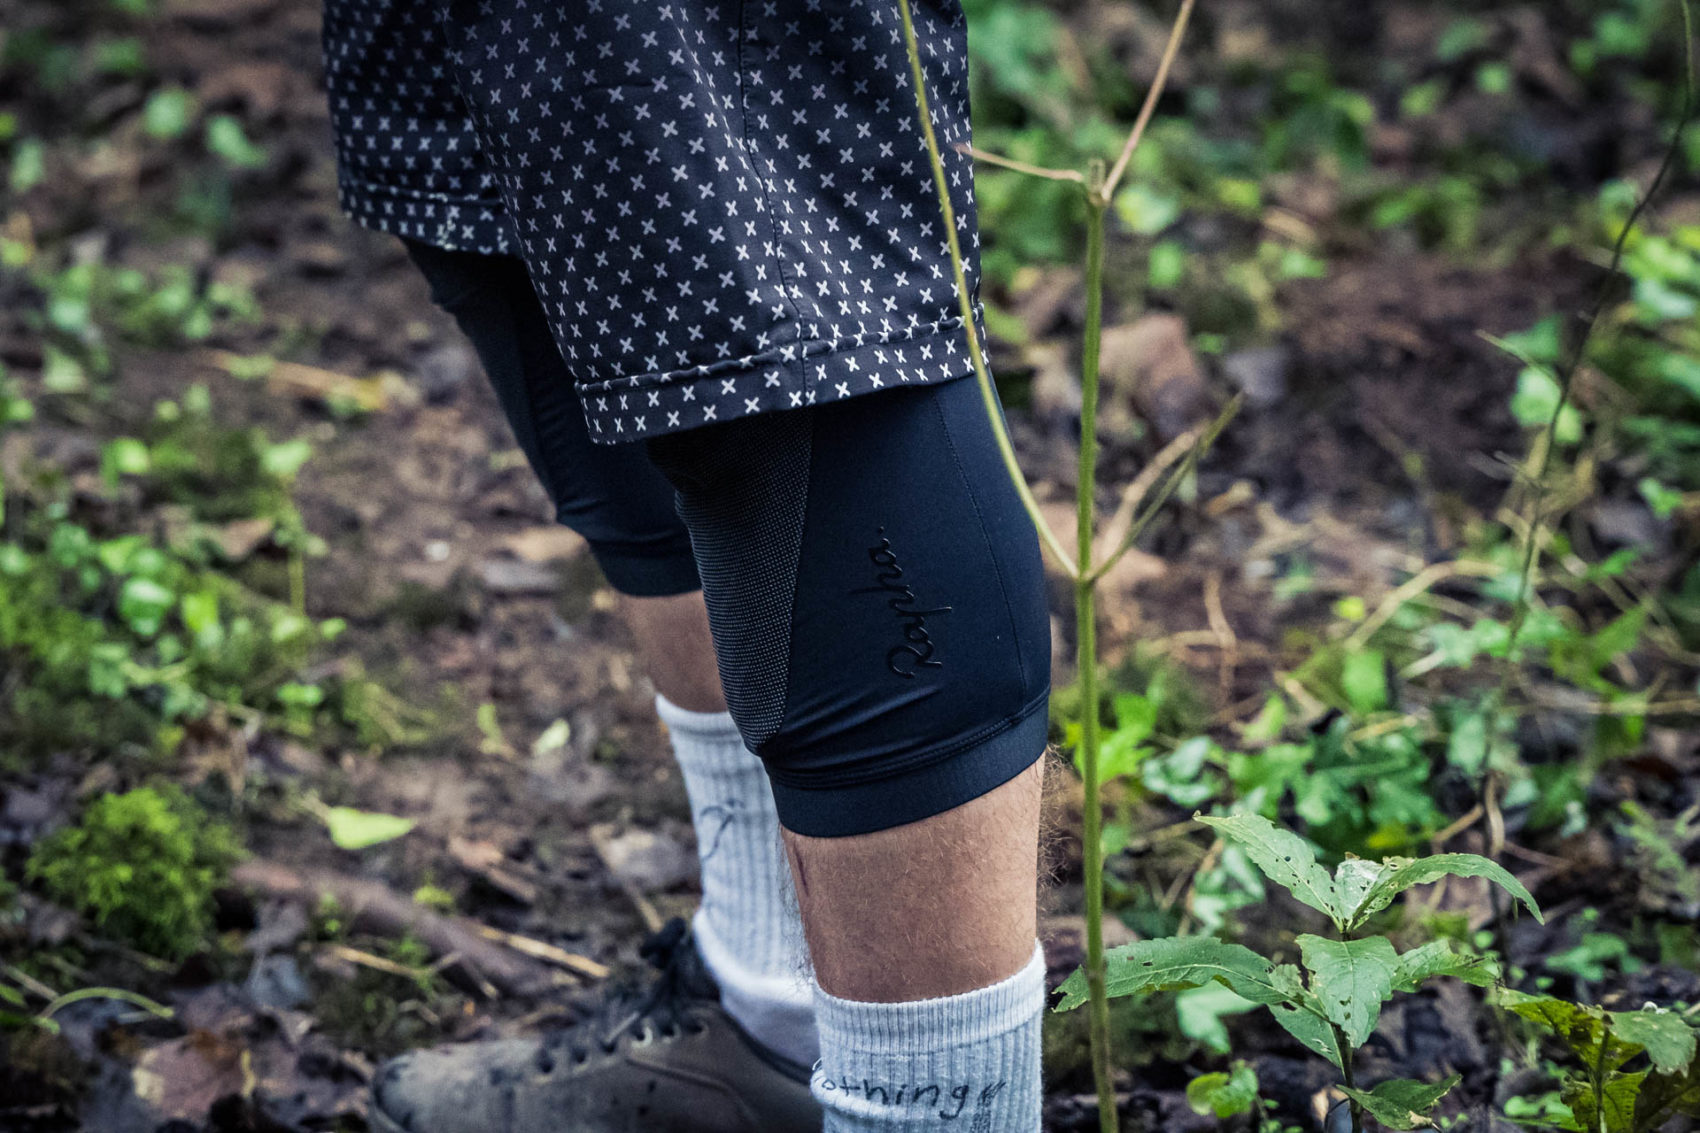 Review: Are Rapha Knee Pads comfortable, breathable and protective